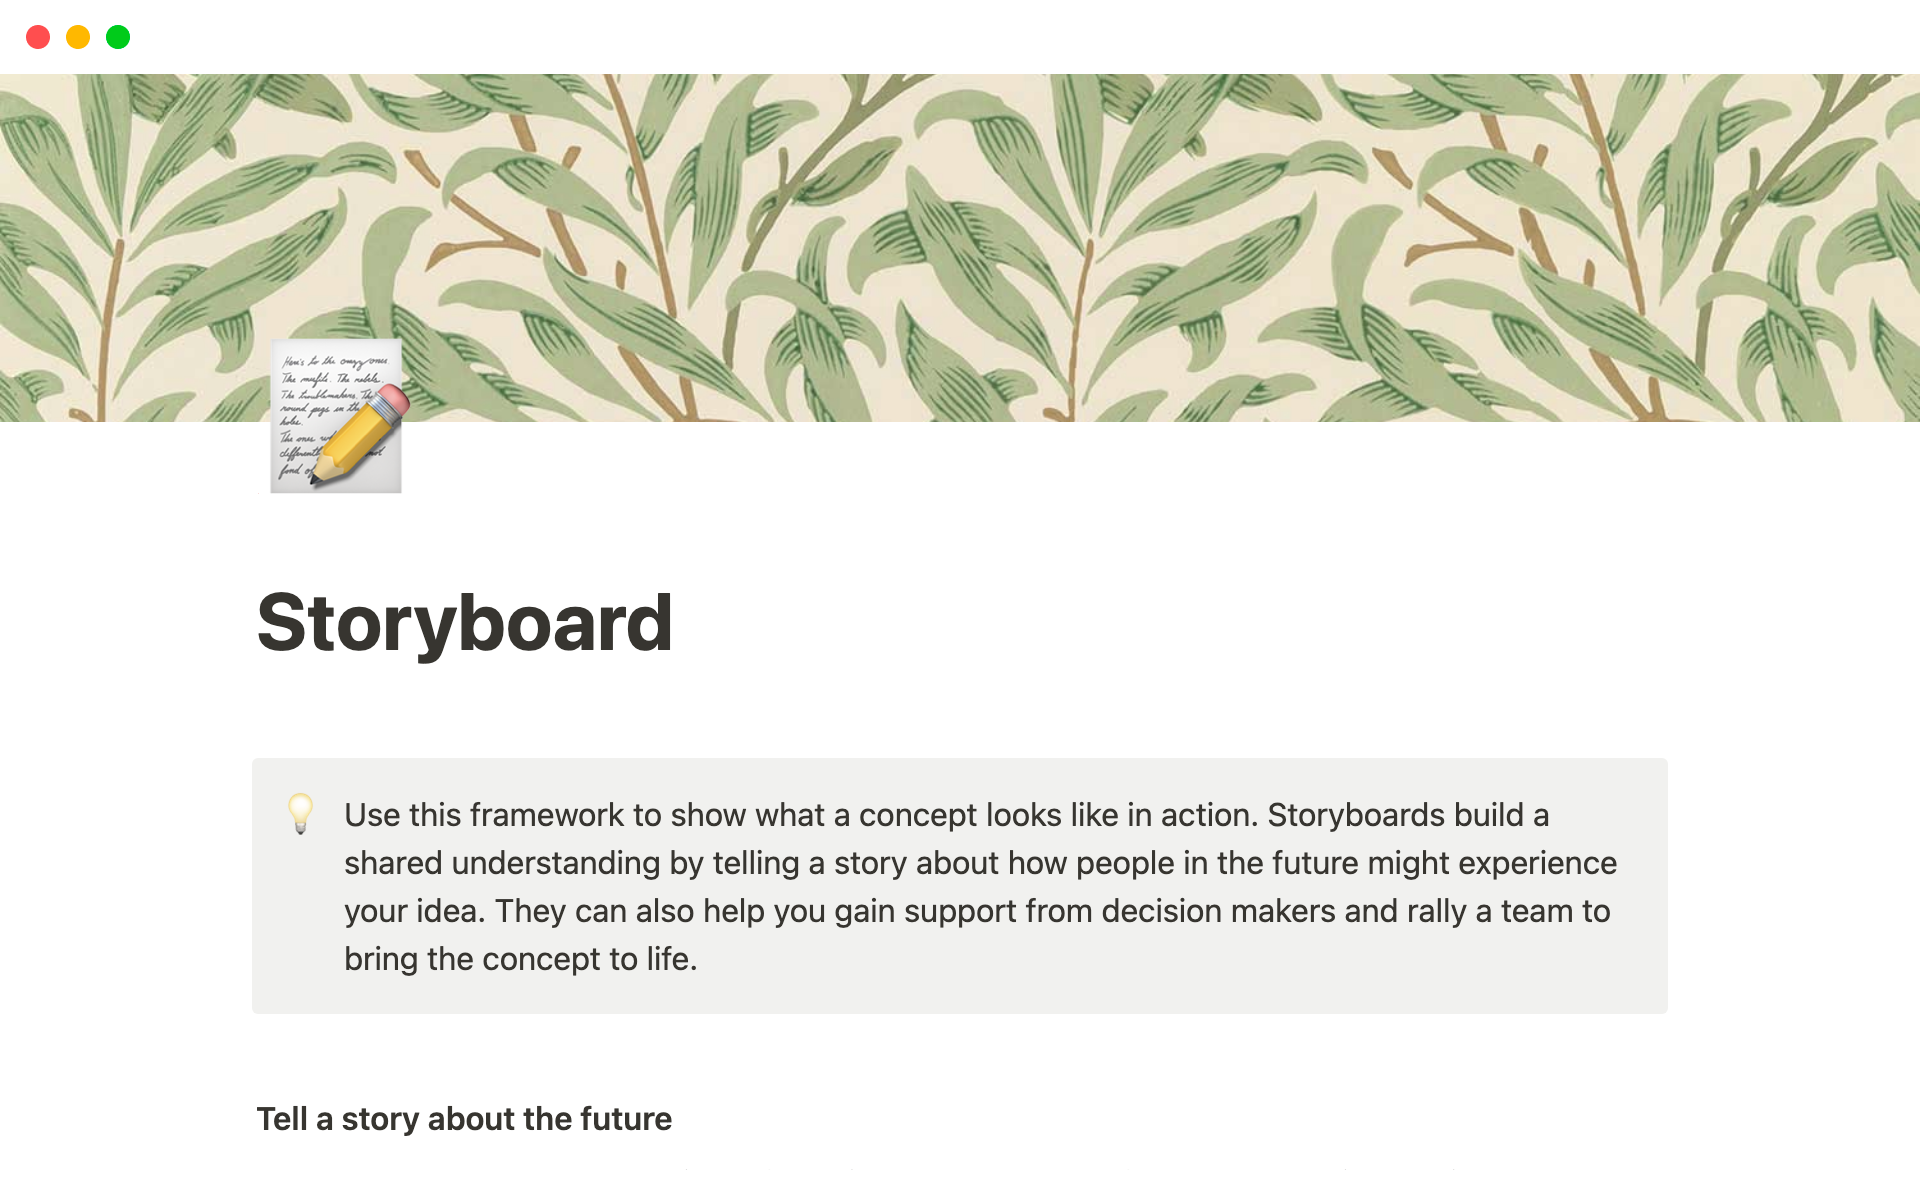 Storyboards build a shared understanding by telling a story about how people in the future might experience your idea.